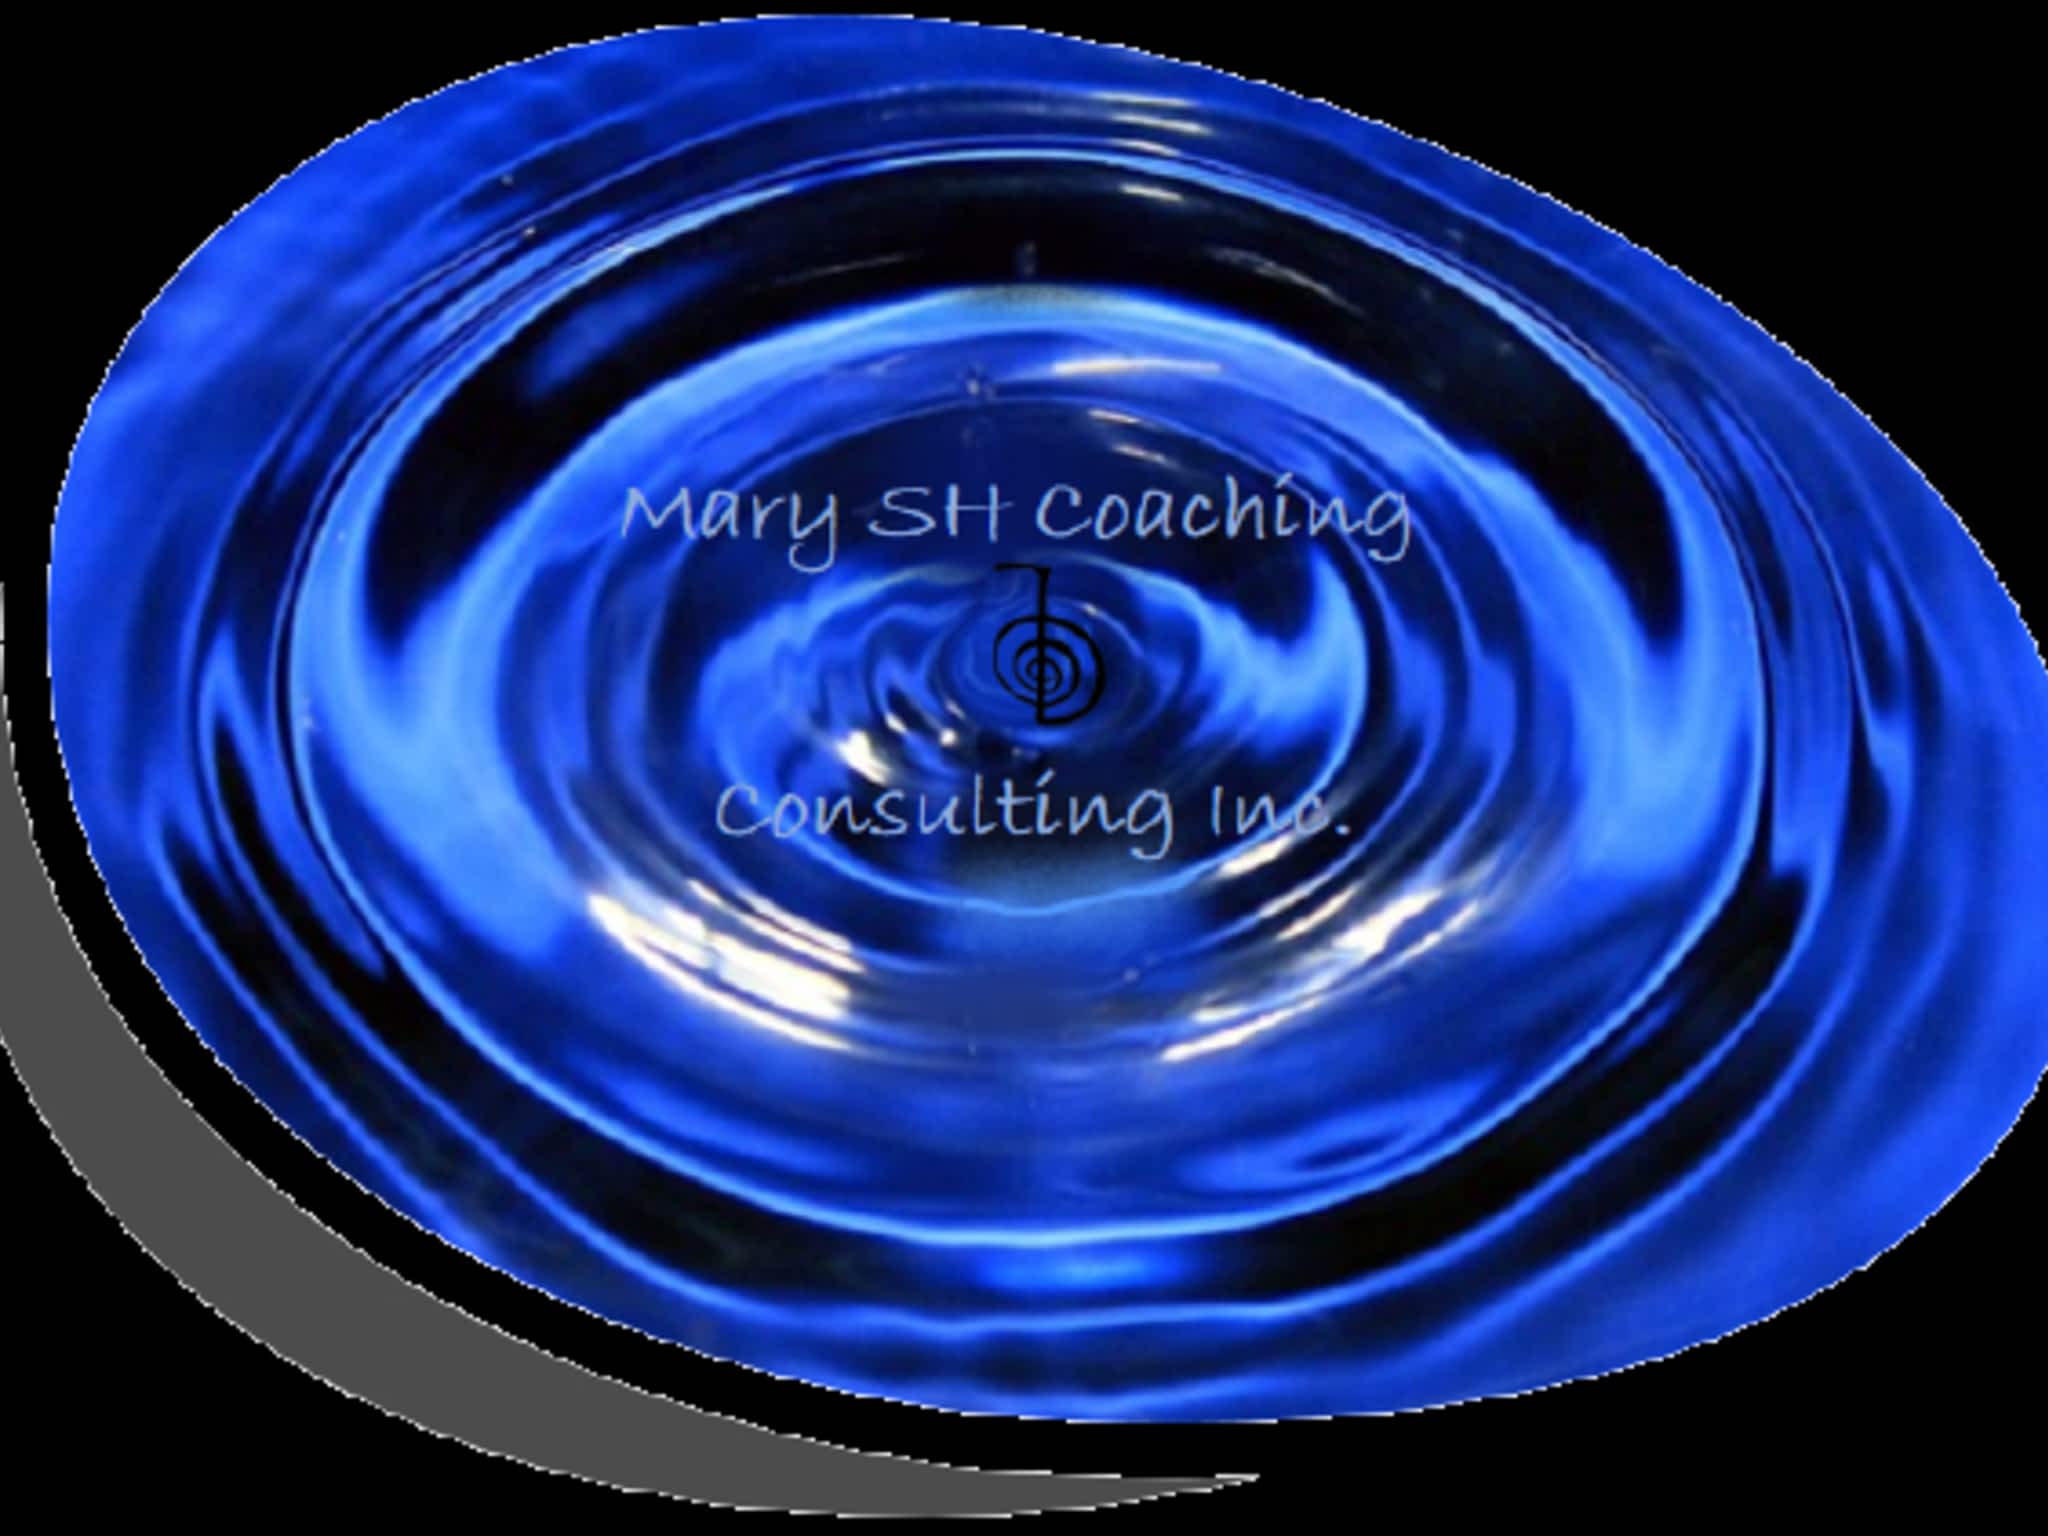 photo Mary SH Coaching & Consulting Inc